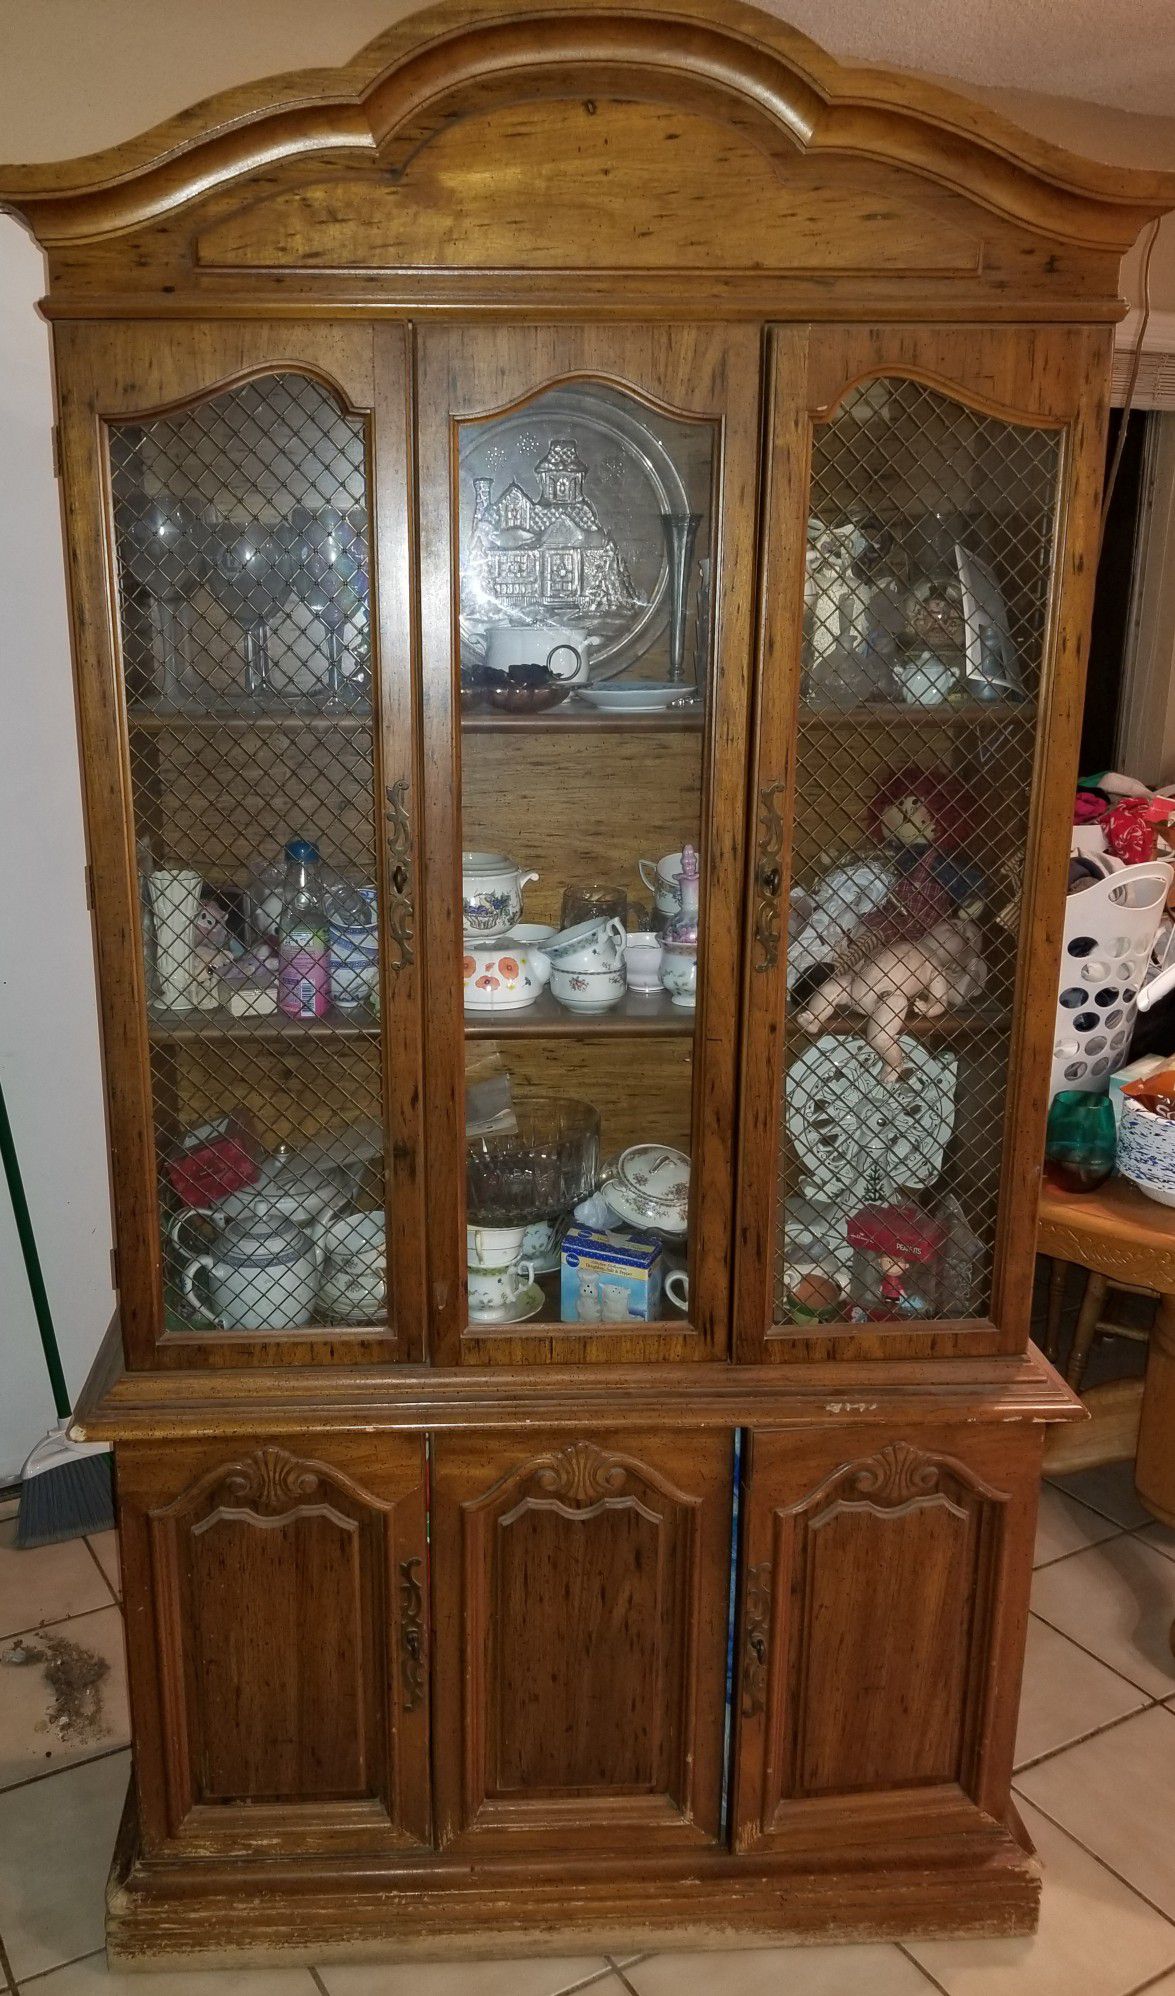 "Moving" Antique China Cabinet With Meshed Wire, And Built In Light Fixture . Items inside the cabinet Are not part of the sale. 13×38×79